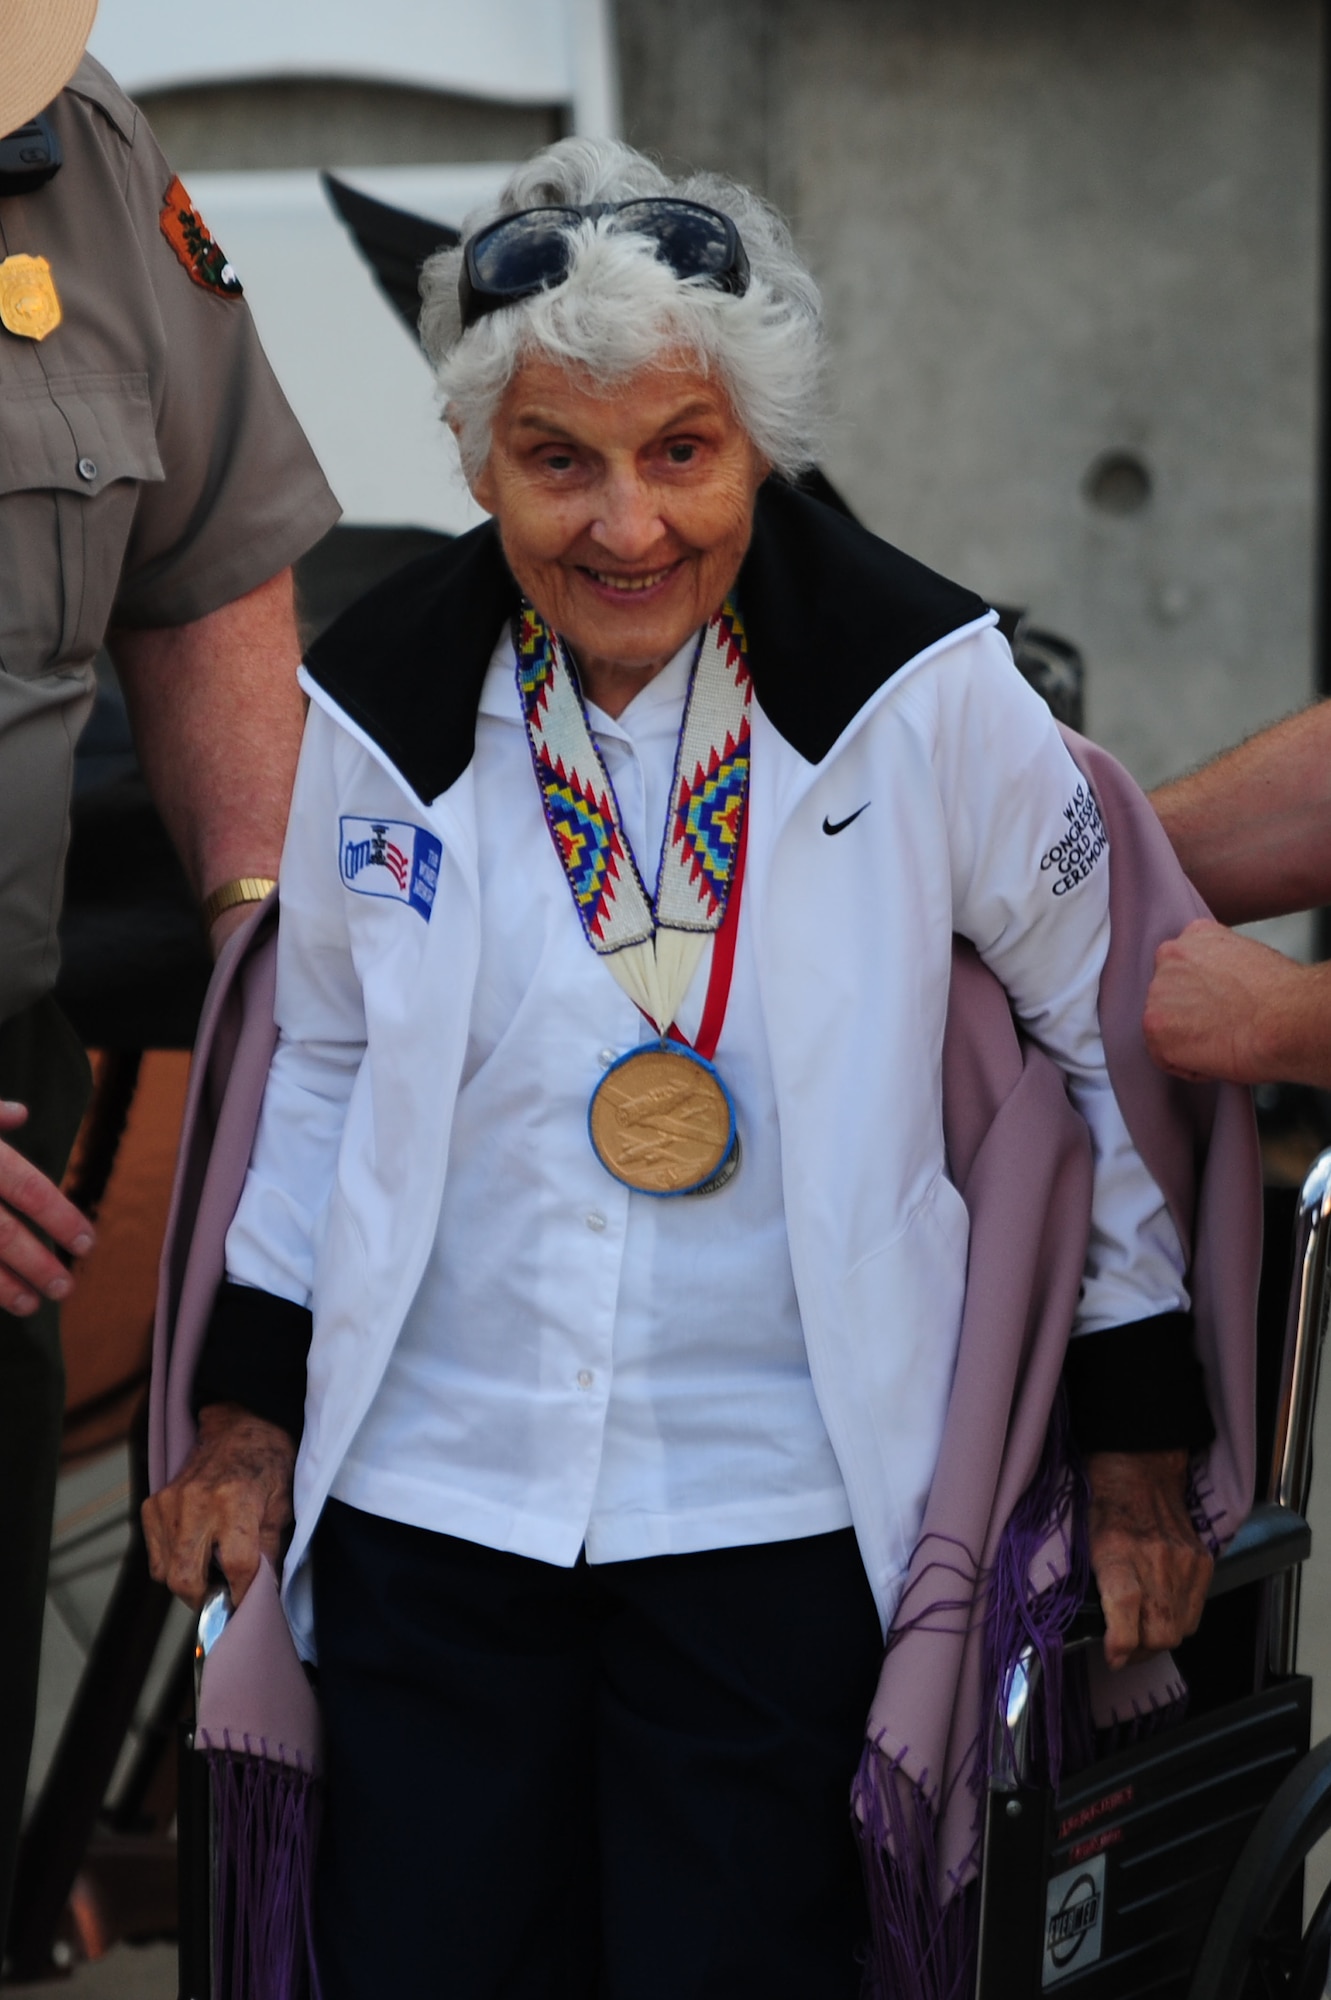 ELLSWORTH AIR FORCE BASE, S.D. – Ola Mildred Rexroat attends the 2010 Independence Day celebration at Mt. Rushmore National Memorial, July 3. Mrs. Rexroat served as a Woman Air Service pilot during World War II.  (U.S. Air Force Photo/Airman 1st Class Corey Hook)